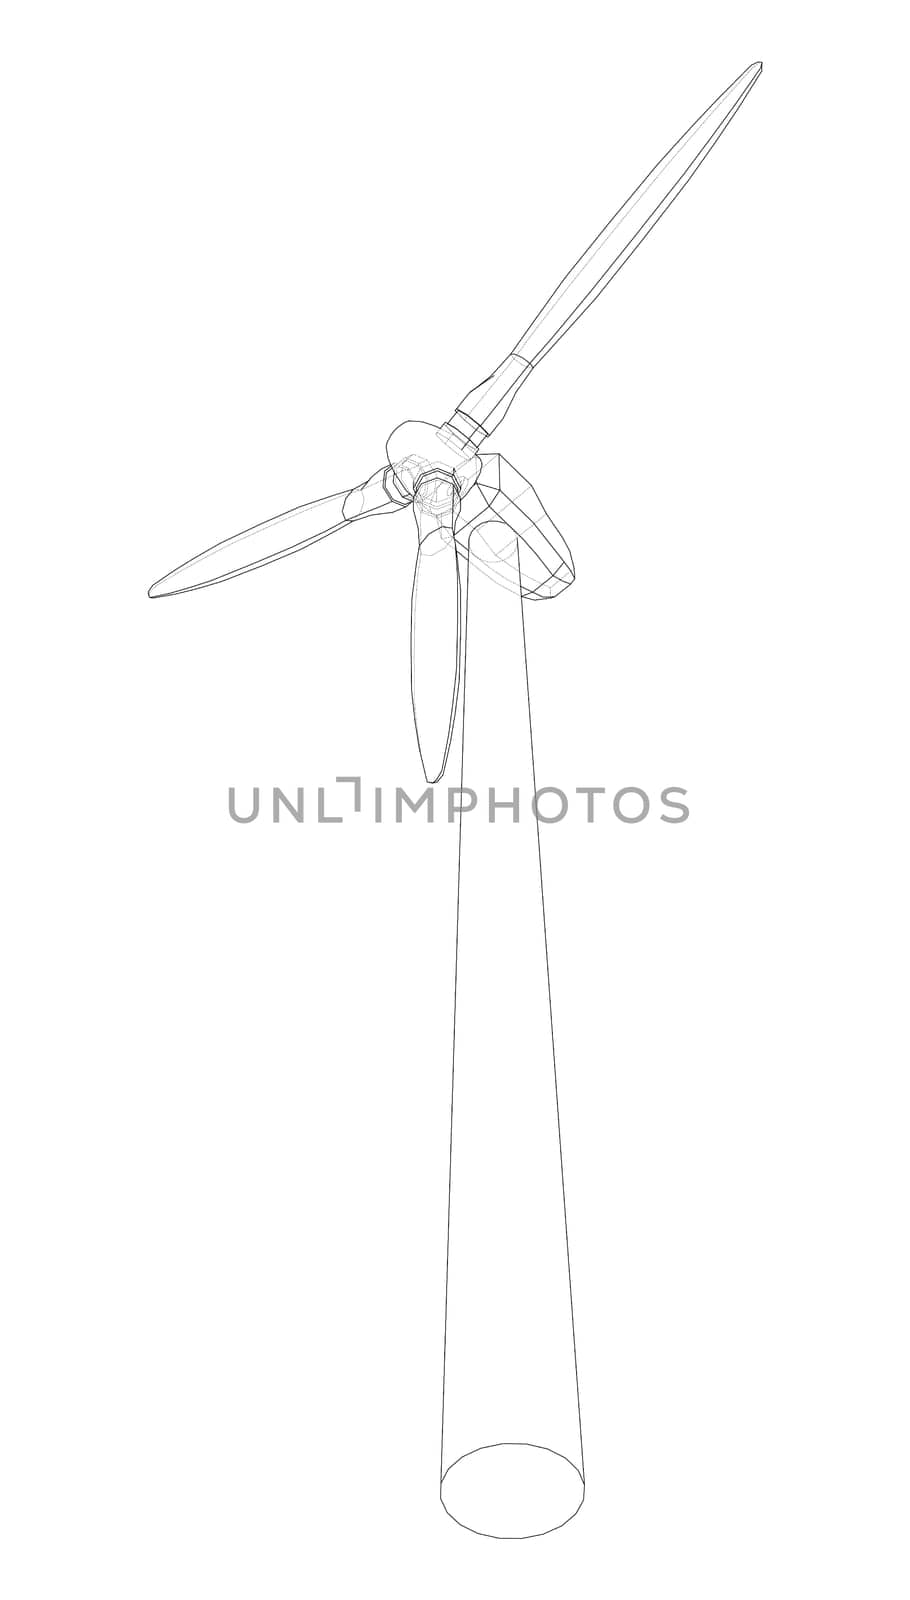 Wind turbine. 3d illustration. Wire-frame style. The layers of visible and invisible lines are separated